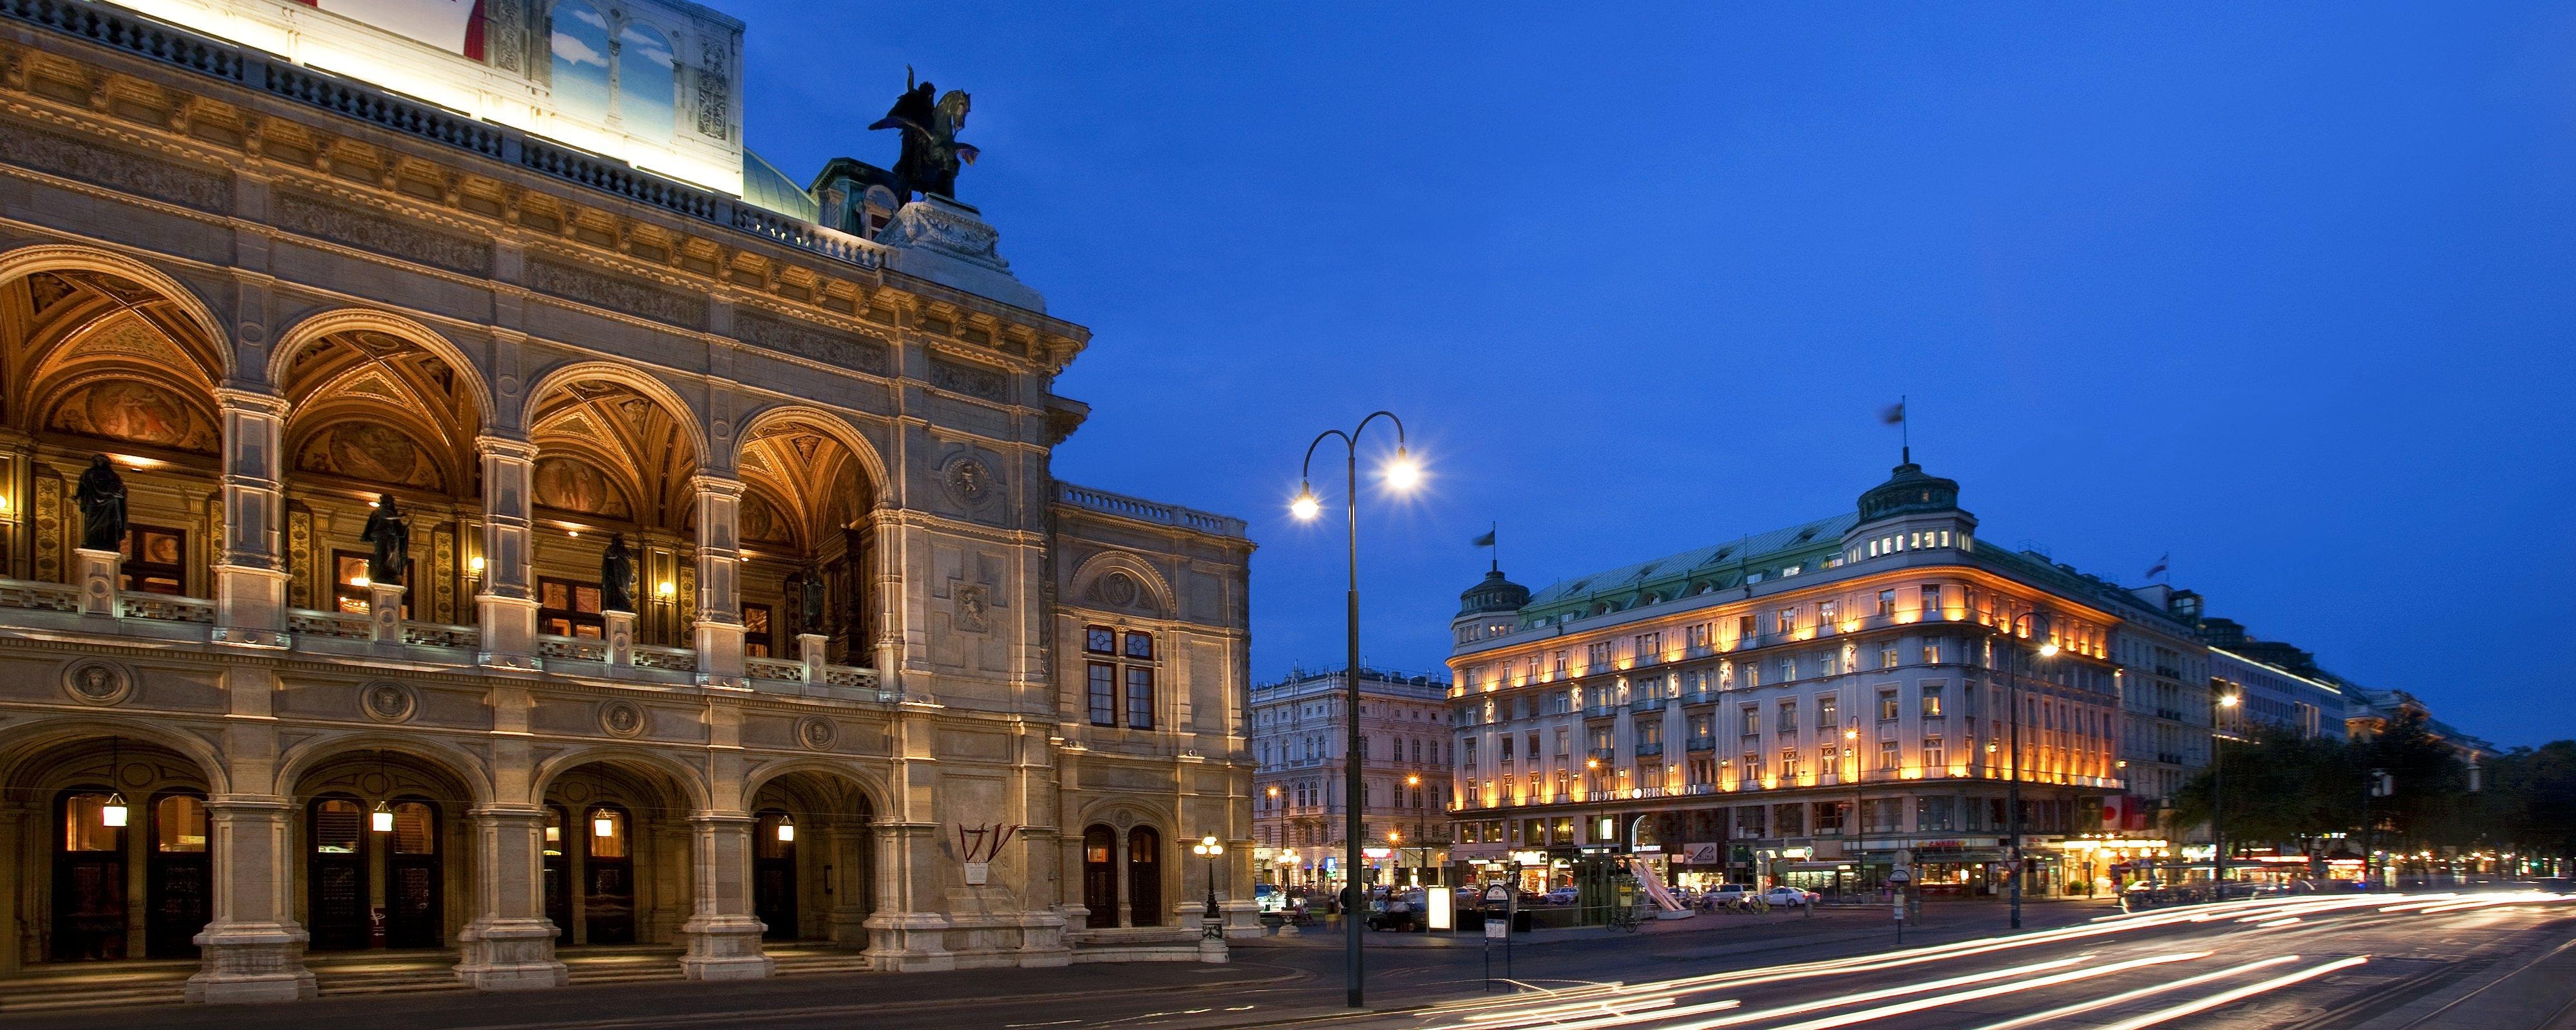 Image for Hotel Bristol, a Luxury Collection Hotel, Vienna, a Marriott hotel.